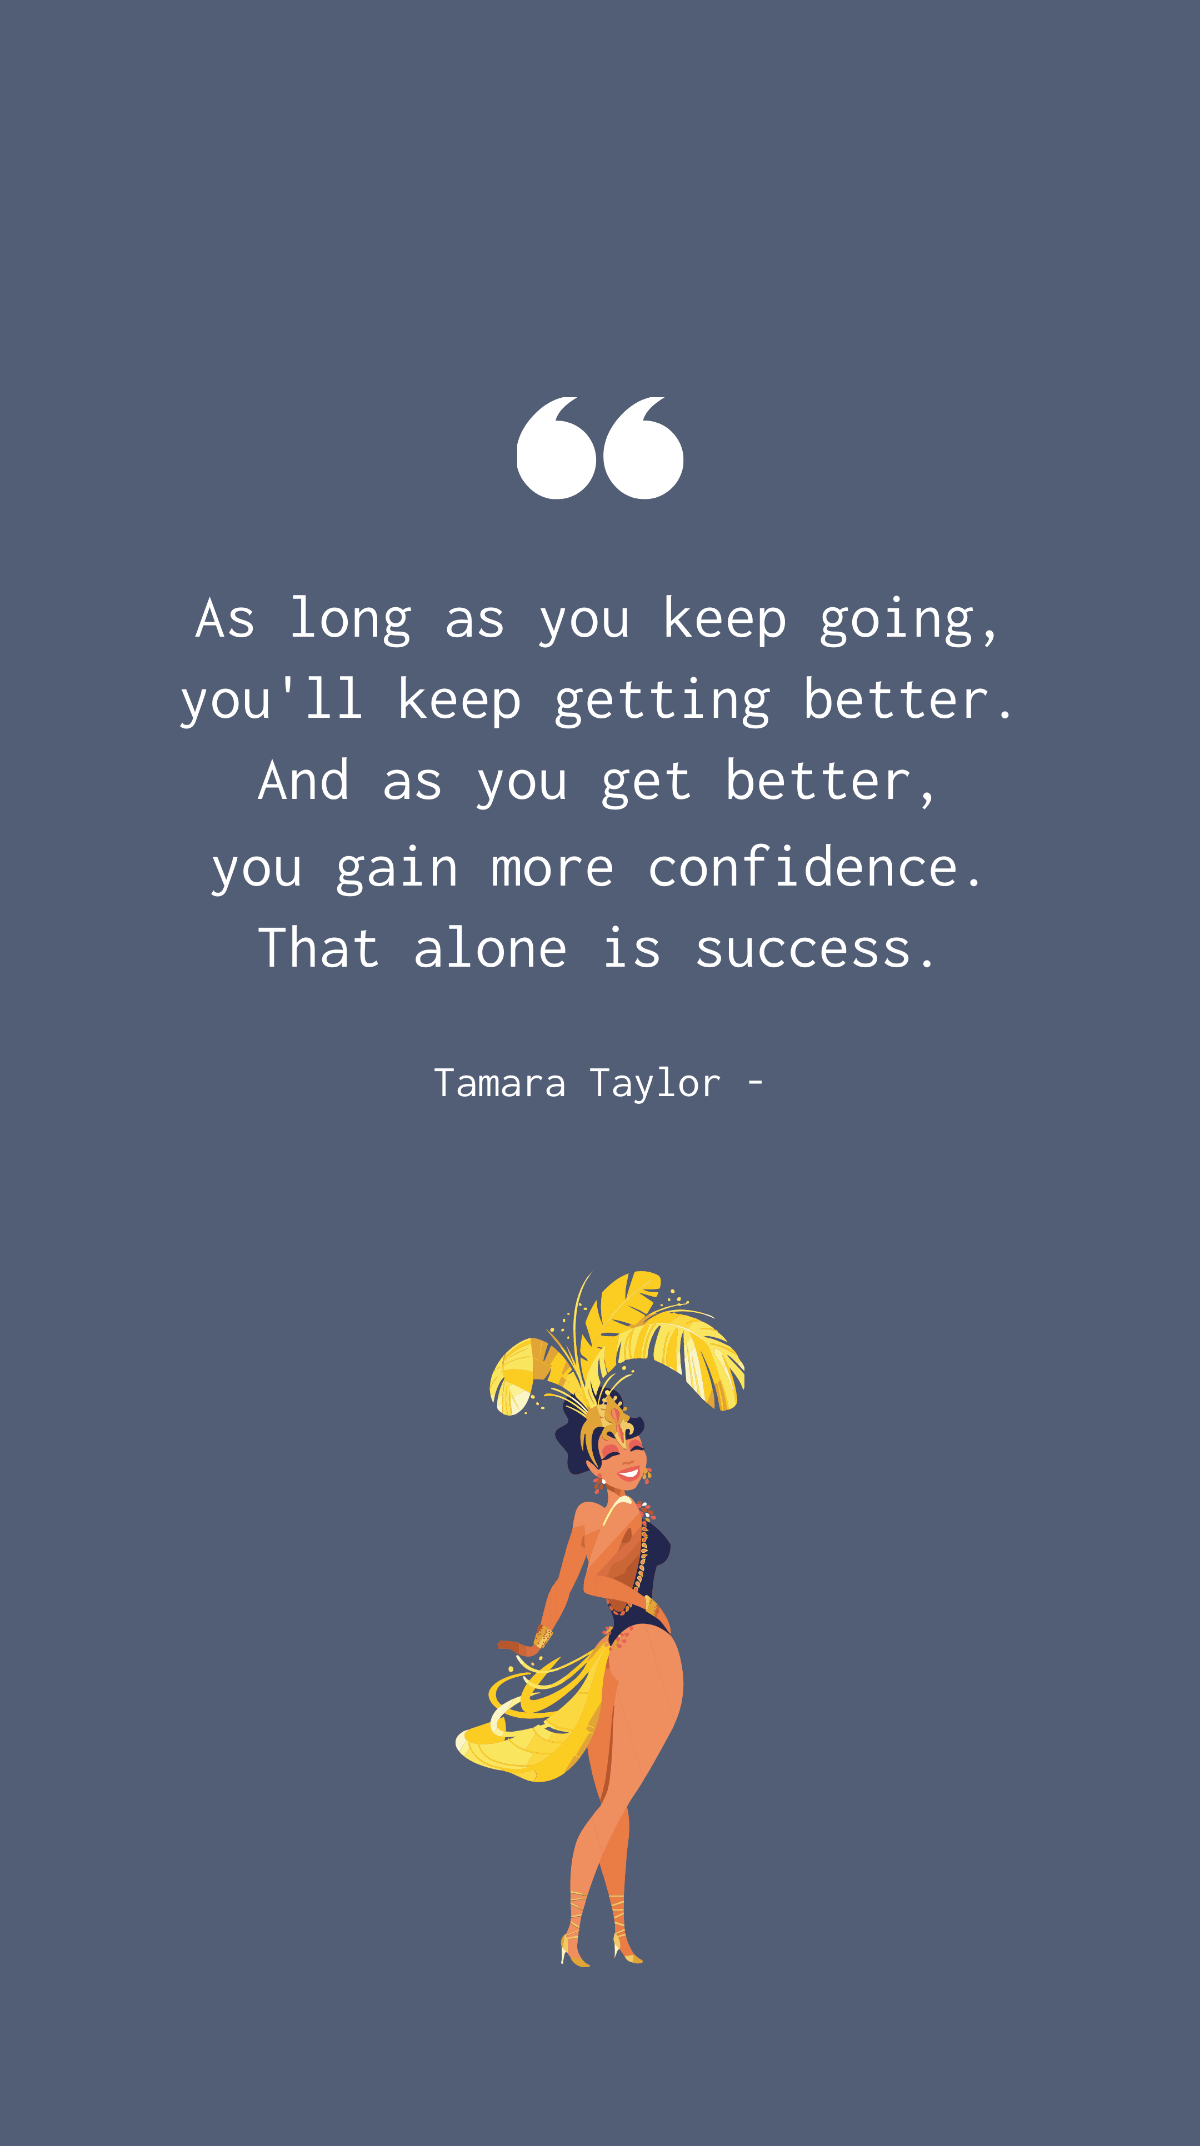 Tamara Taylor - As long as you keep going, you'll keep getting better. And as you get better, you gain more confidence. That alone is success. Template